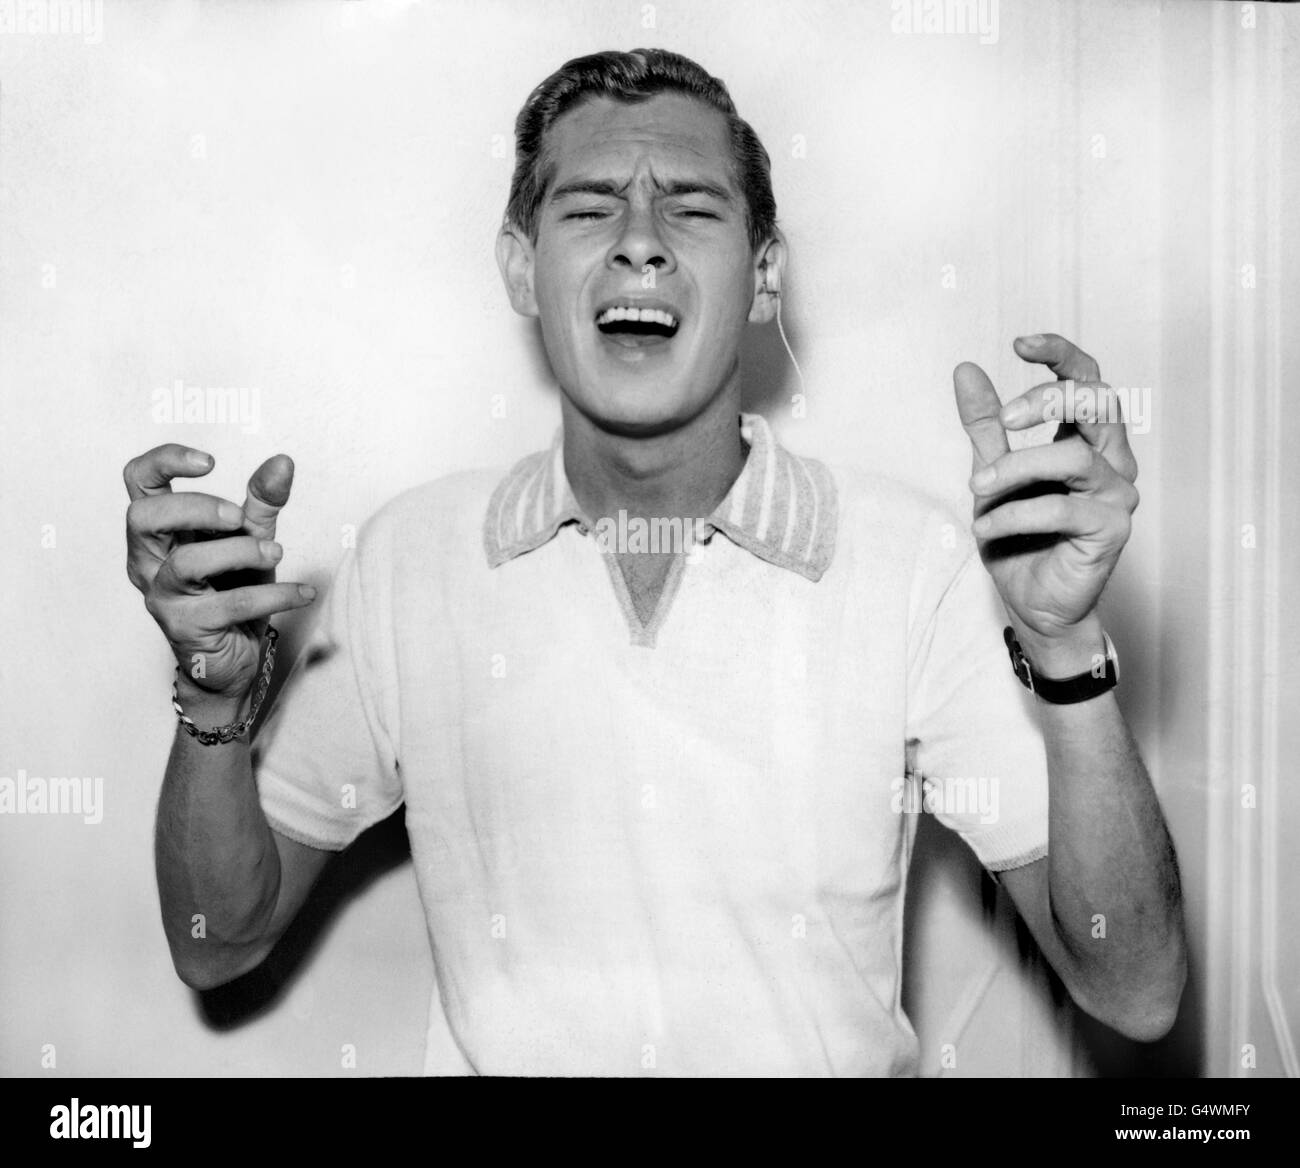 Johnnie Ray entertains fans at a reception in a London hotel to celebrate his arrival from New York. Ray flew in to star in the commercial television show 'Sunday Night at the London Palladium'. Crash barriers and extra police were needed to control the crowds of screaming girls. Stock Photo